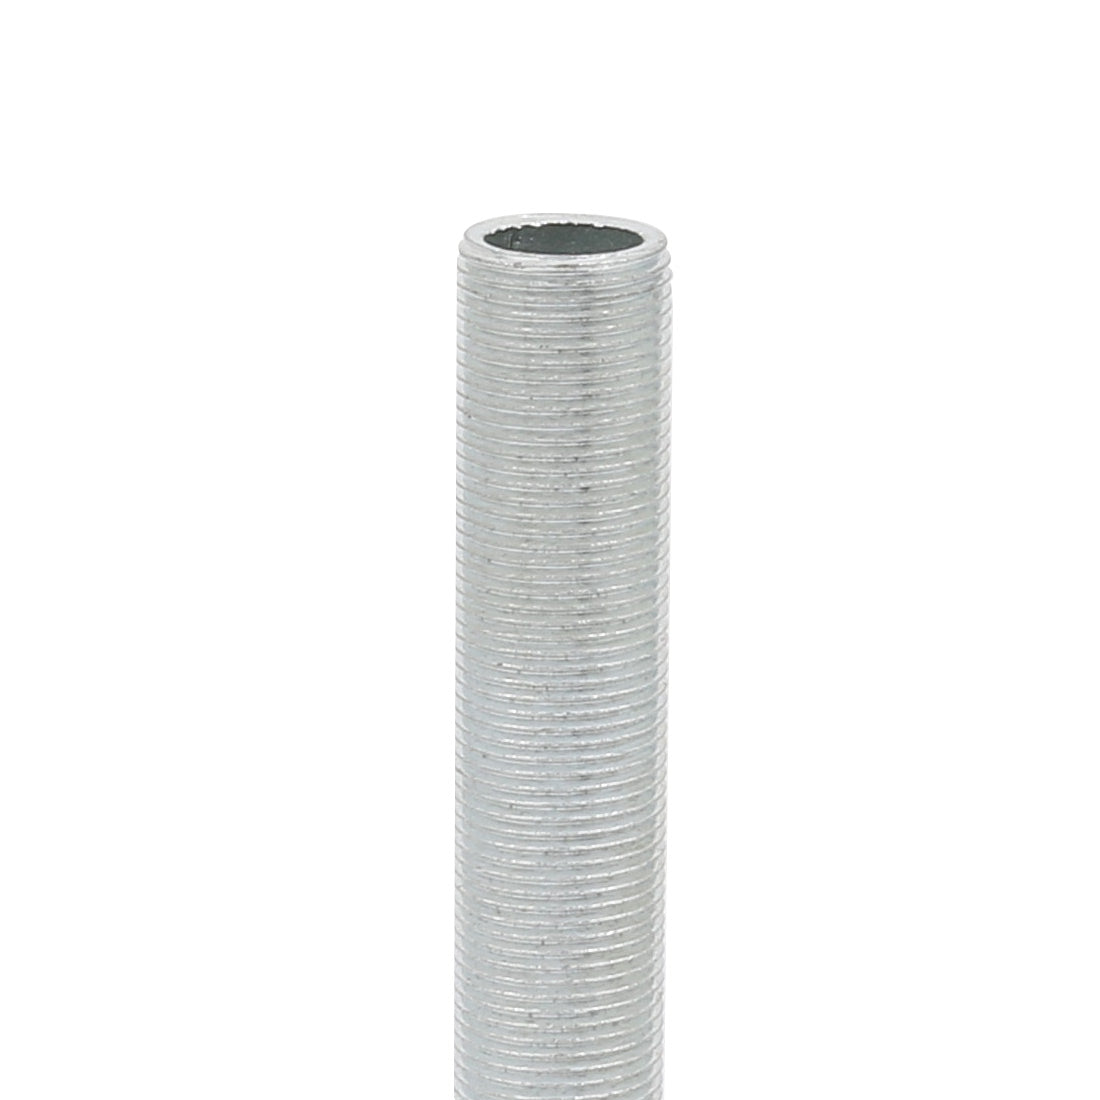 uxcell Uxcell Metric M14 1mm Pitch Thread Zinc Plated Pipe Nipple Lamp Repair Parts 120mm Long